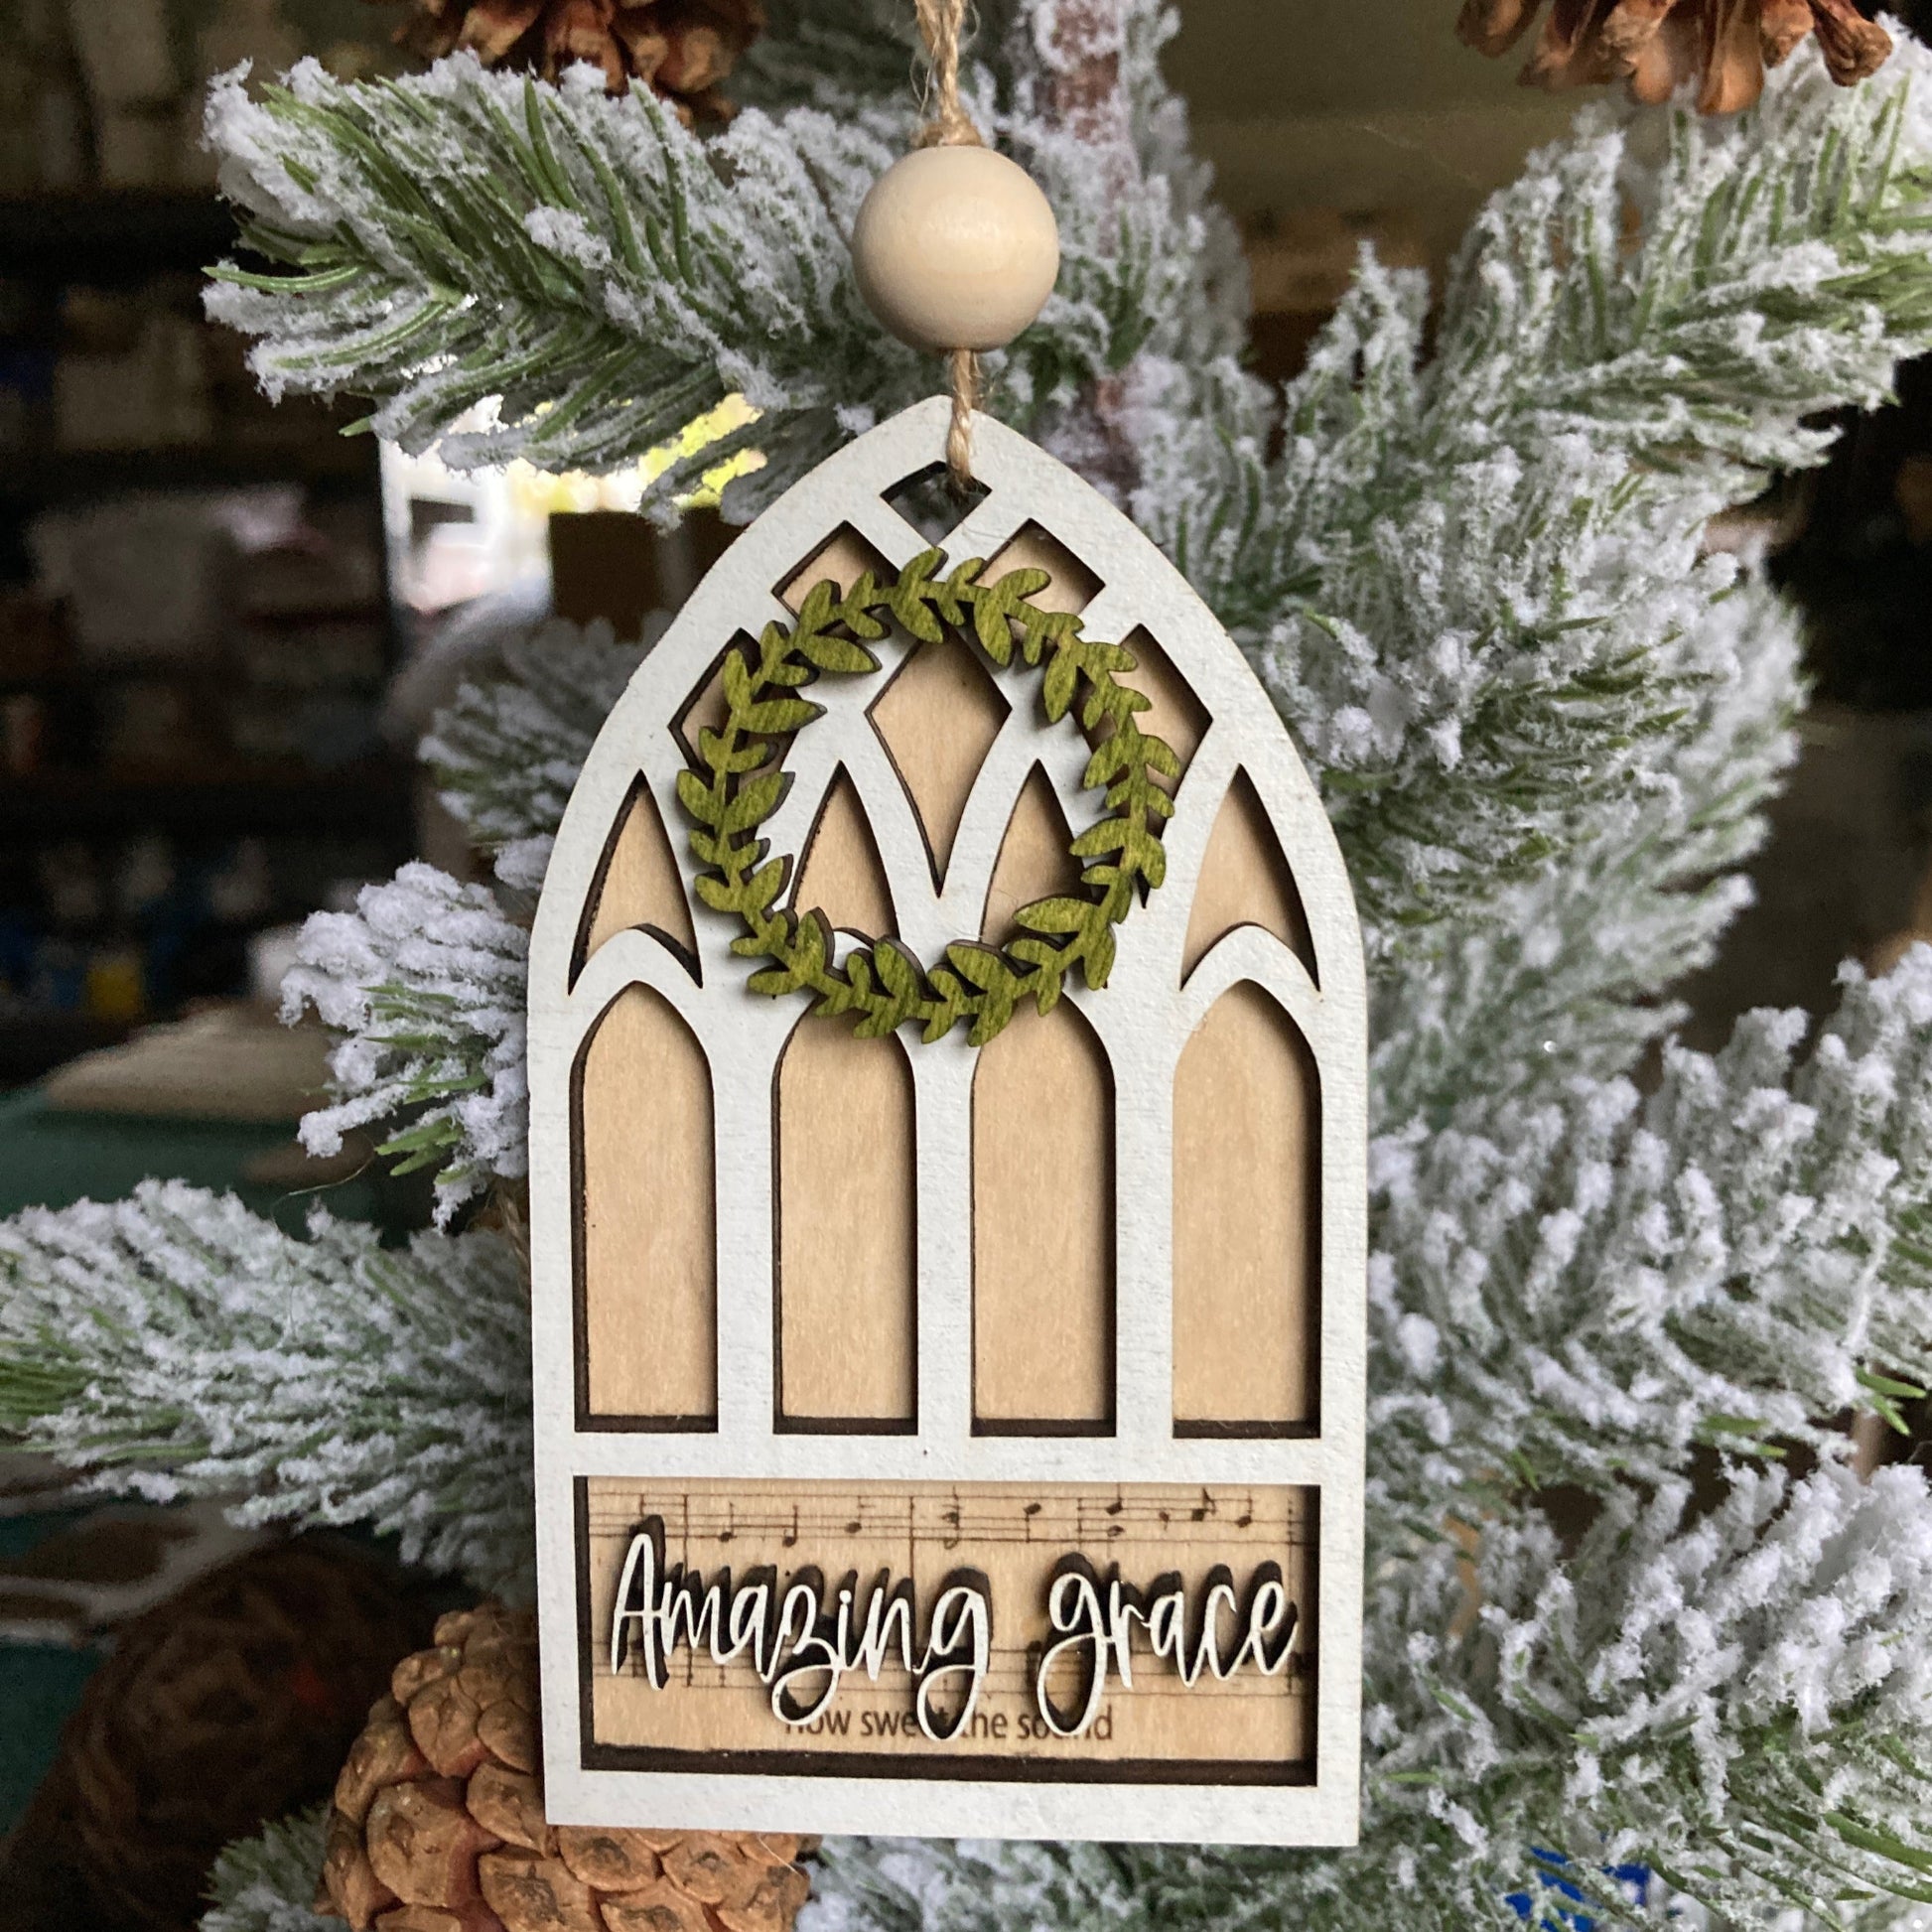 Stained glass window shaped ornament that has Amazing Grace sheet music laser engraved on natural wood for the background. The top layer is the window shape with a green wooden wreath at the top. A wood bead is with the jute string hanger